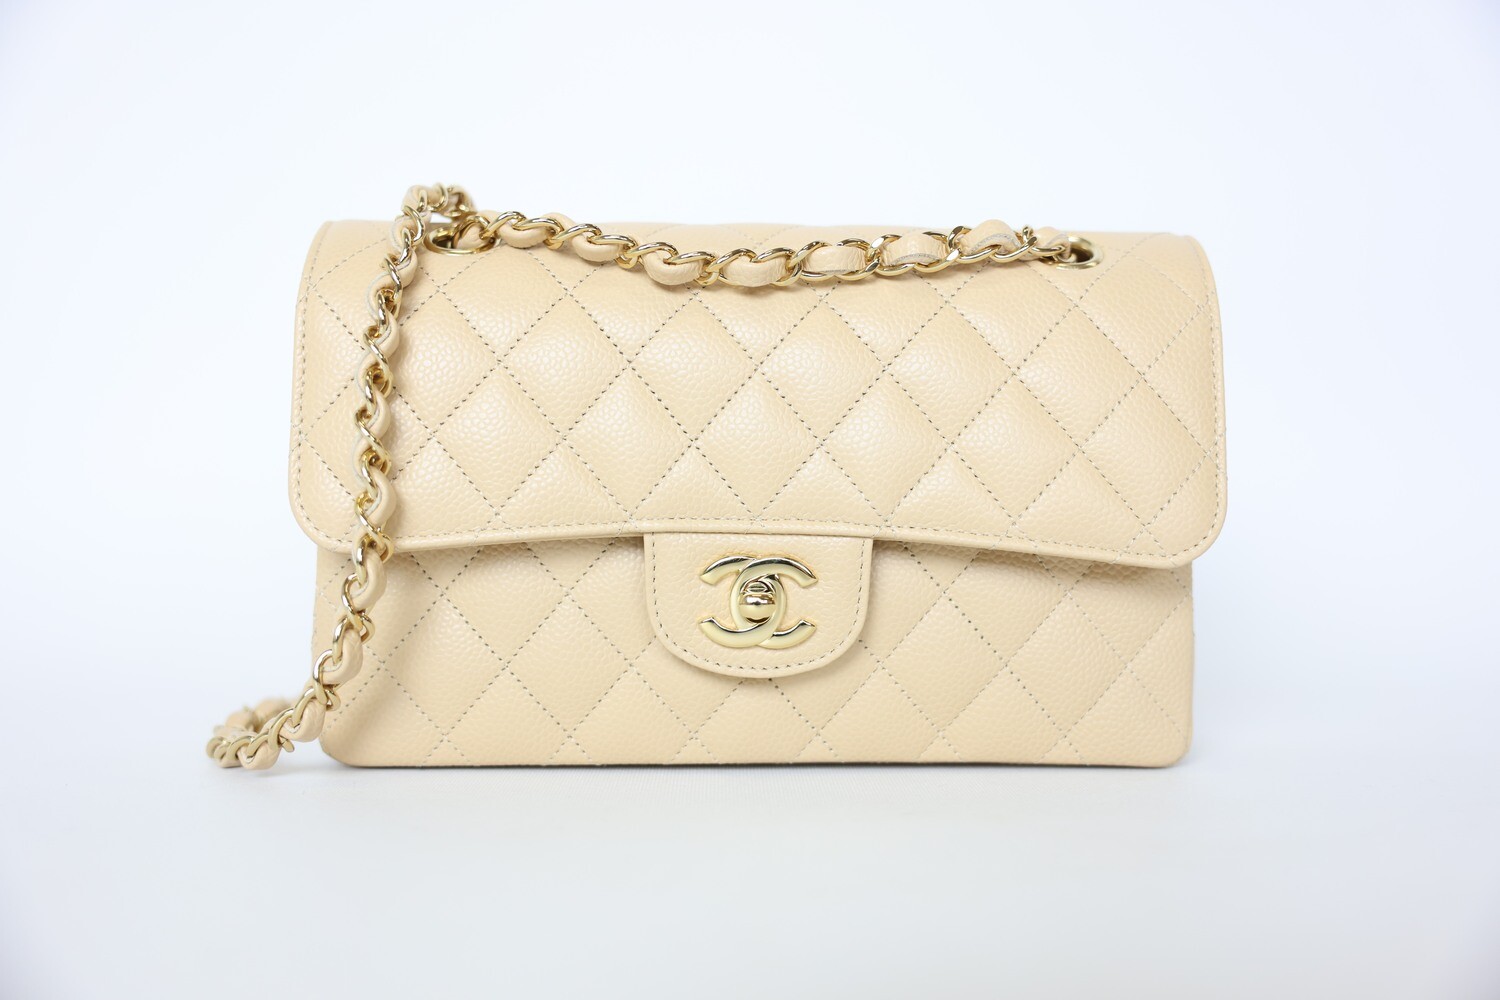 Chanel Classic Small, Beige Caviar with Gold Hardware, New in Box